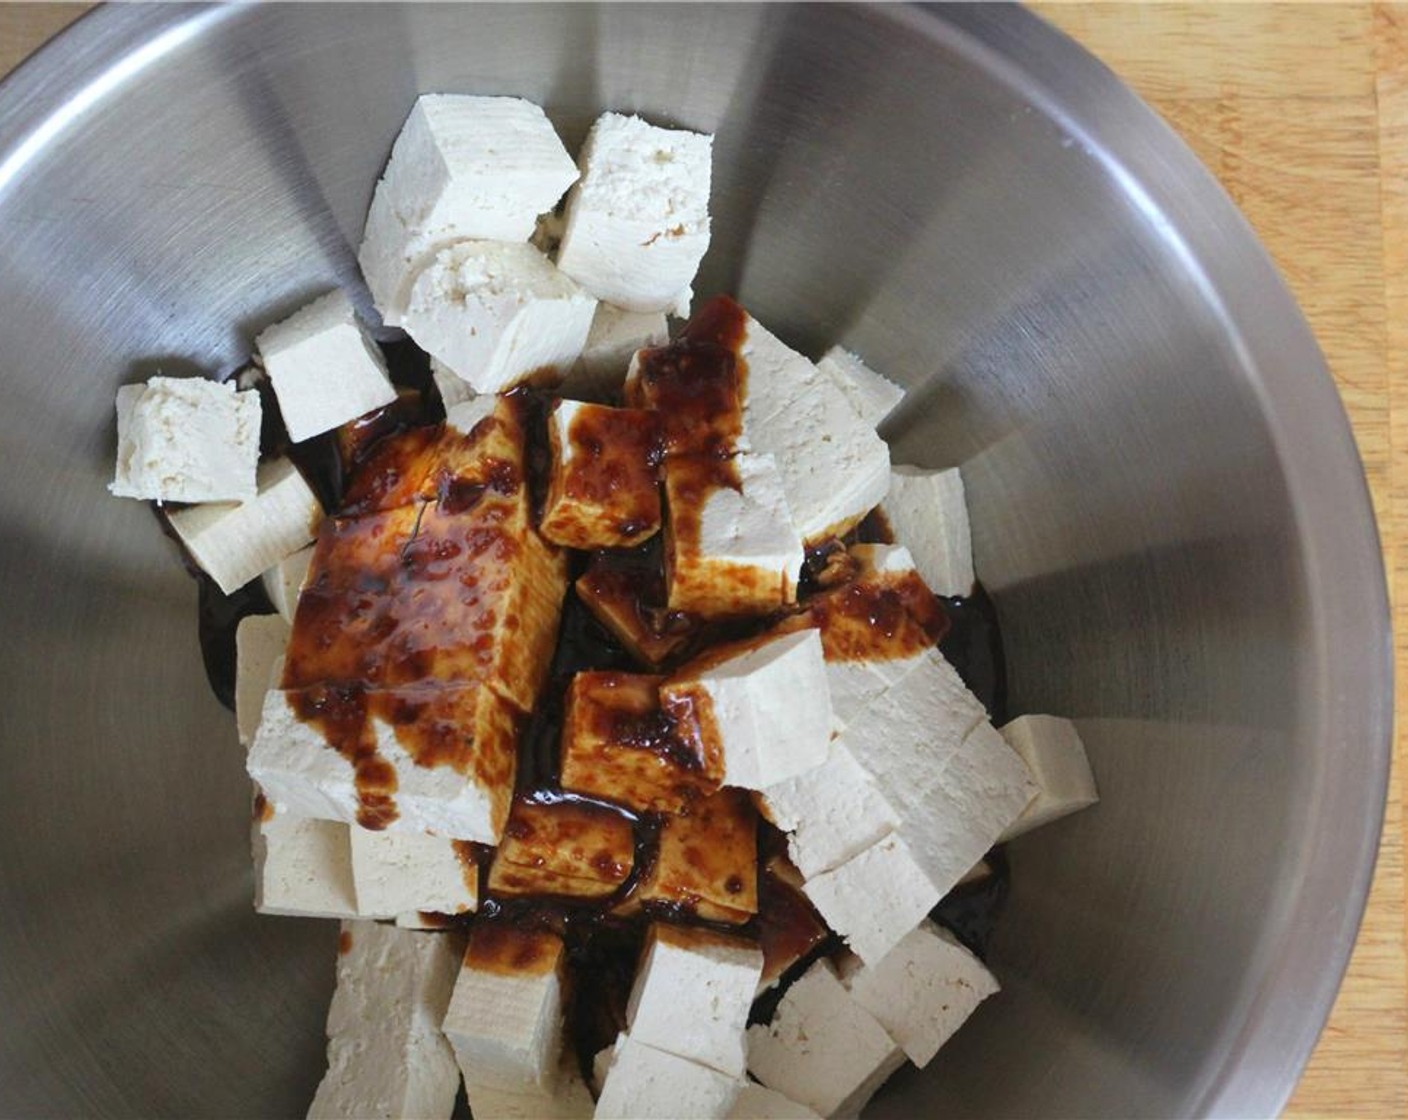 step 4 When the tofu is ready, cube up the slabs and add to the marinate. Toss the cubes gently by hand to coat. Let sit for 10 minutes.